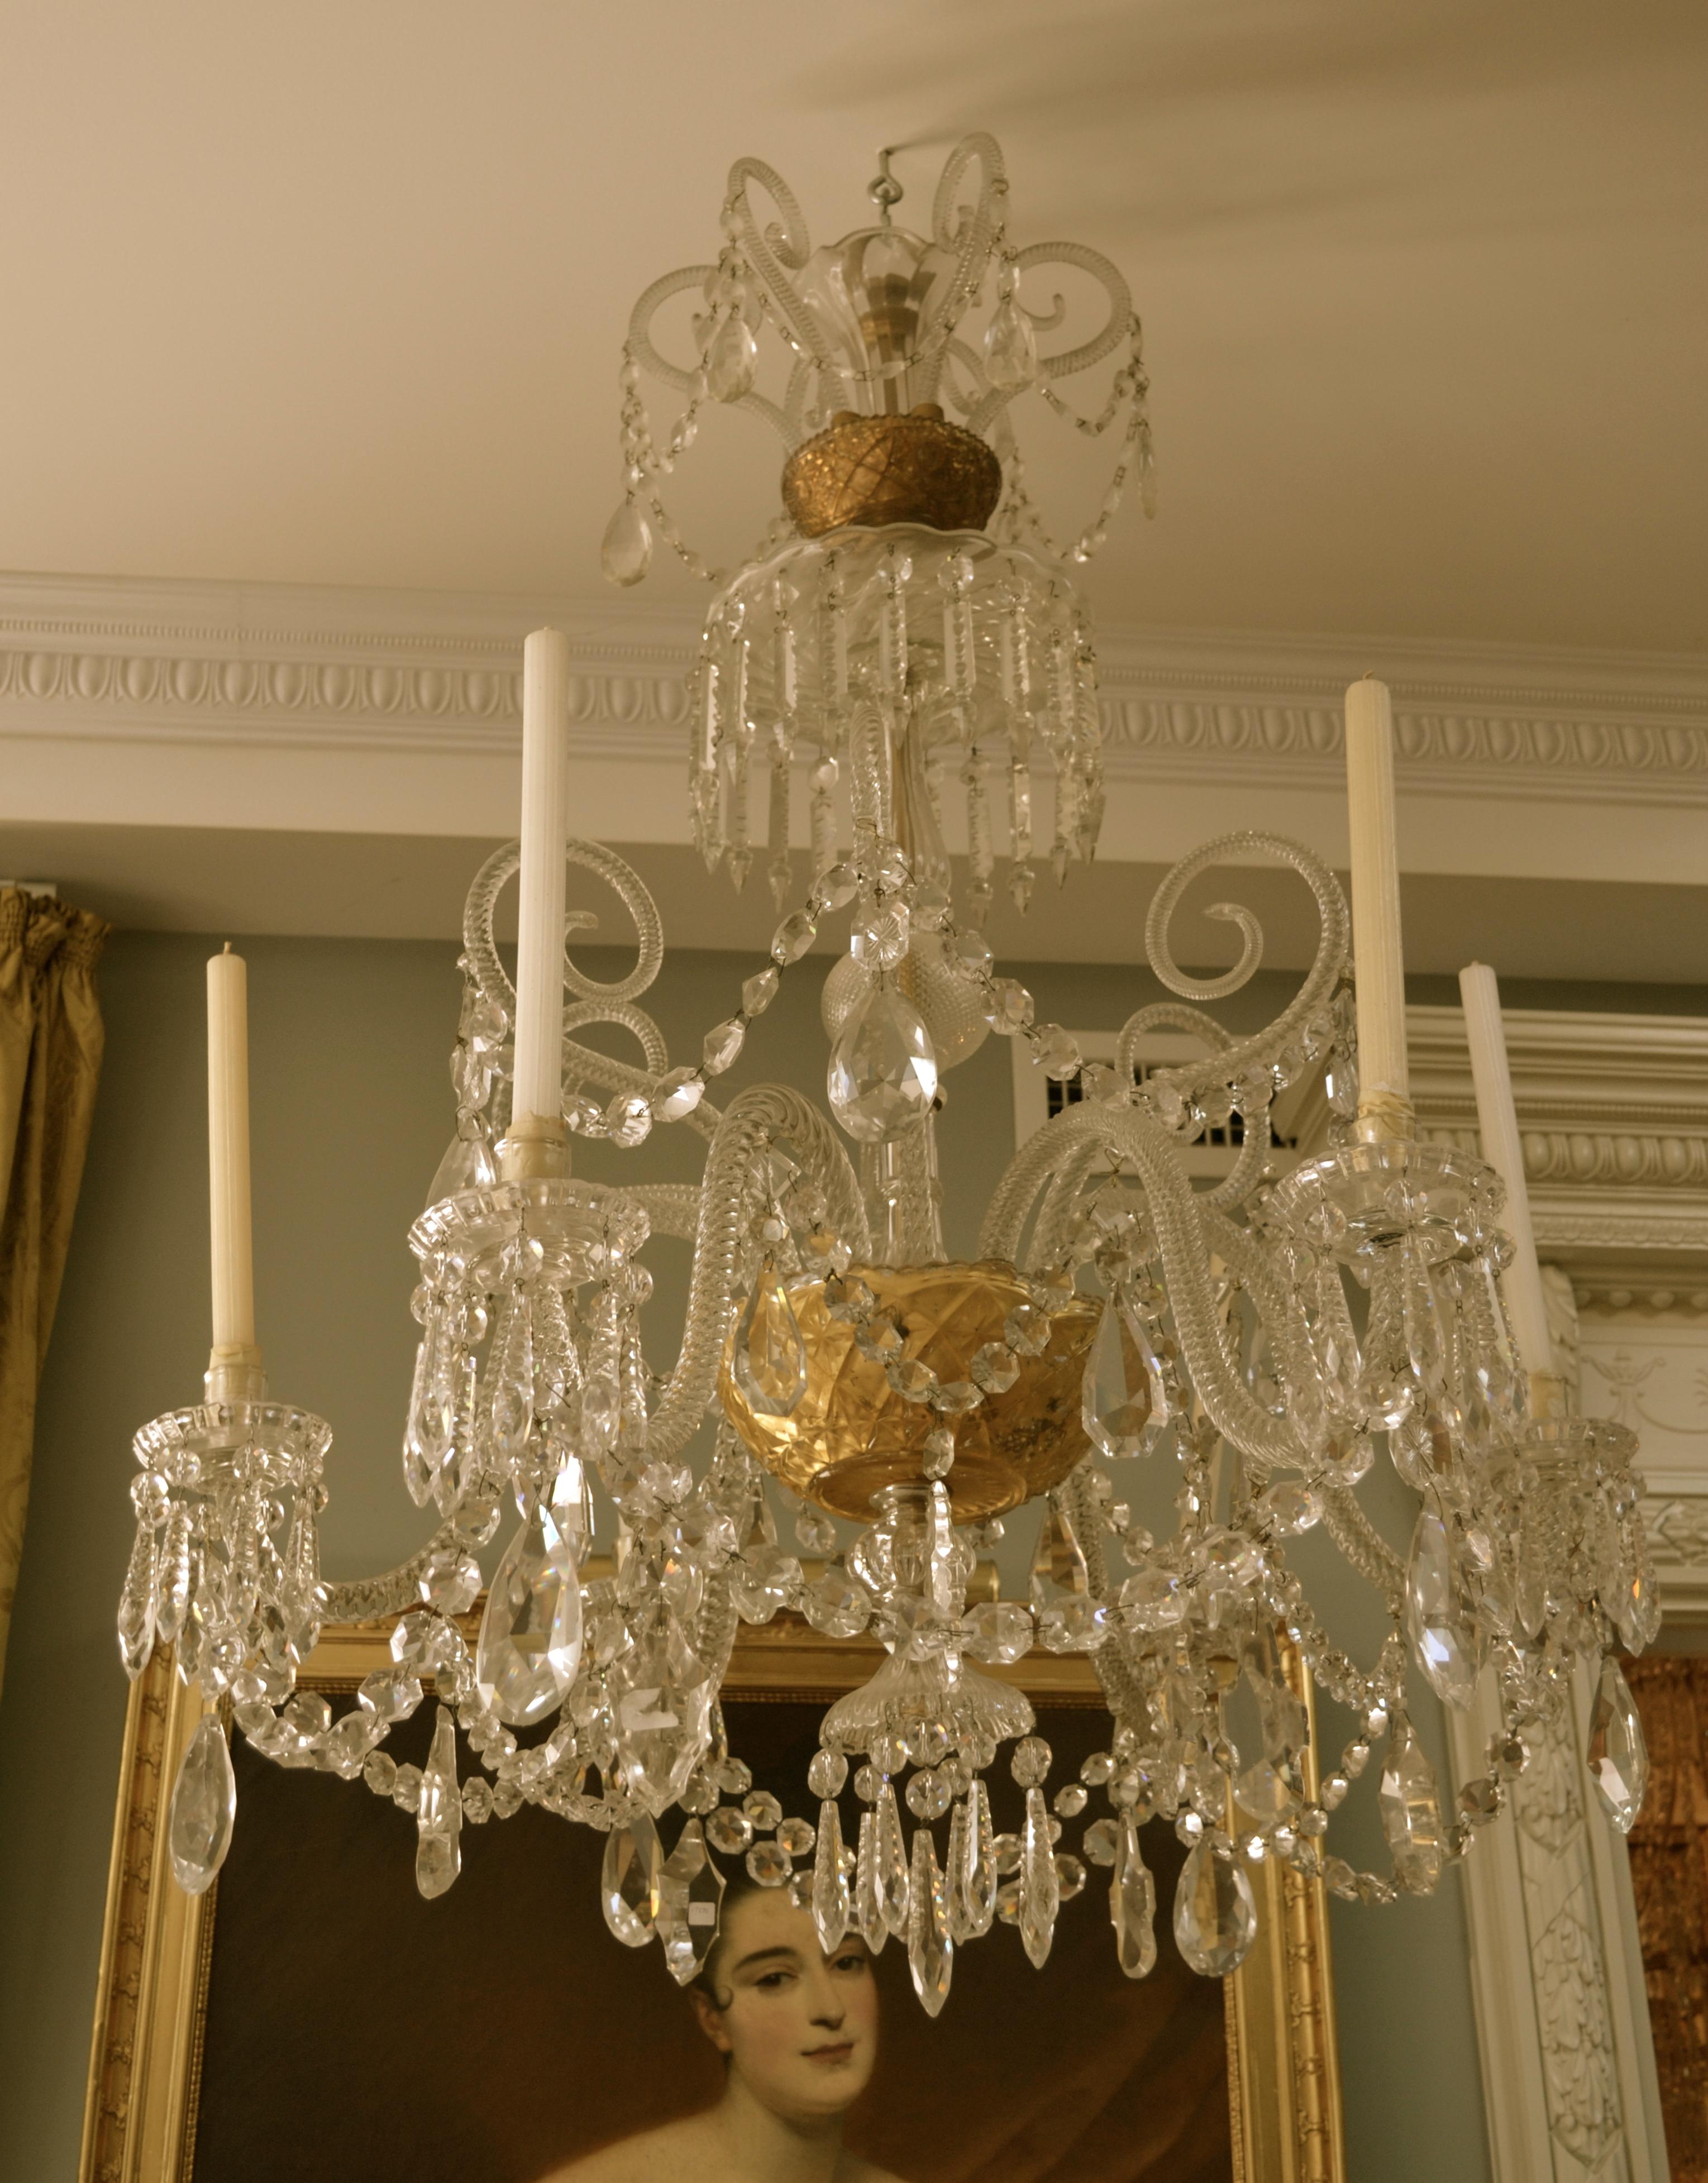 Faceted Rare Original 19 Century Six-Arm Cut Crystal Baccarat Chandelier For Sale